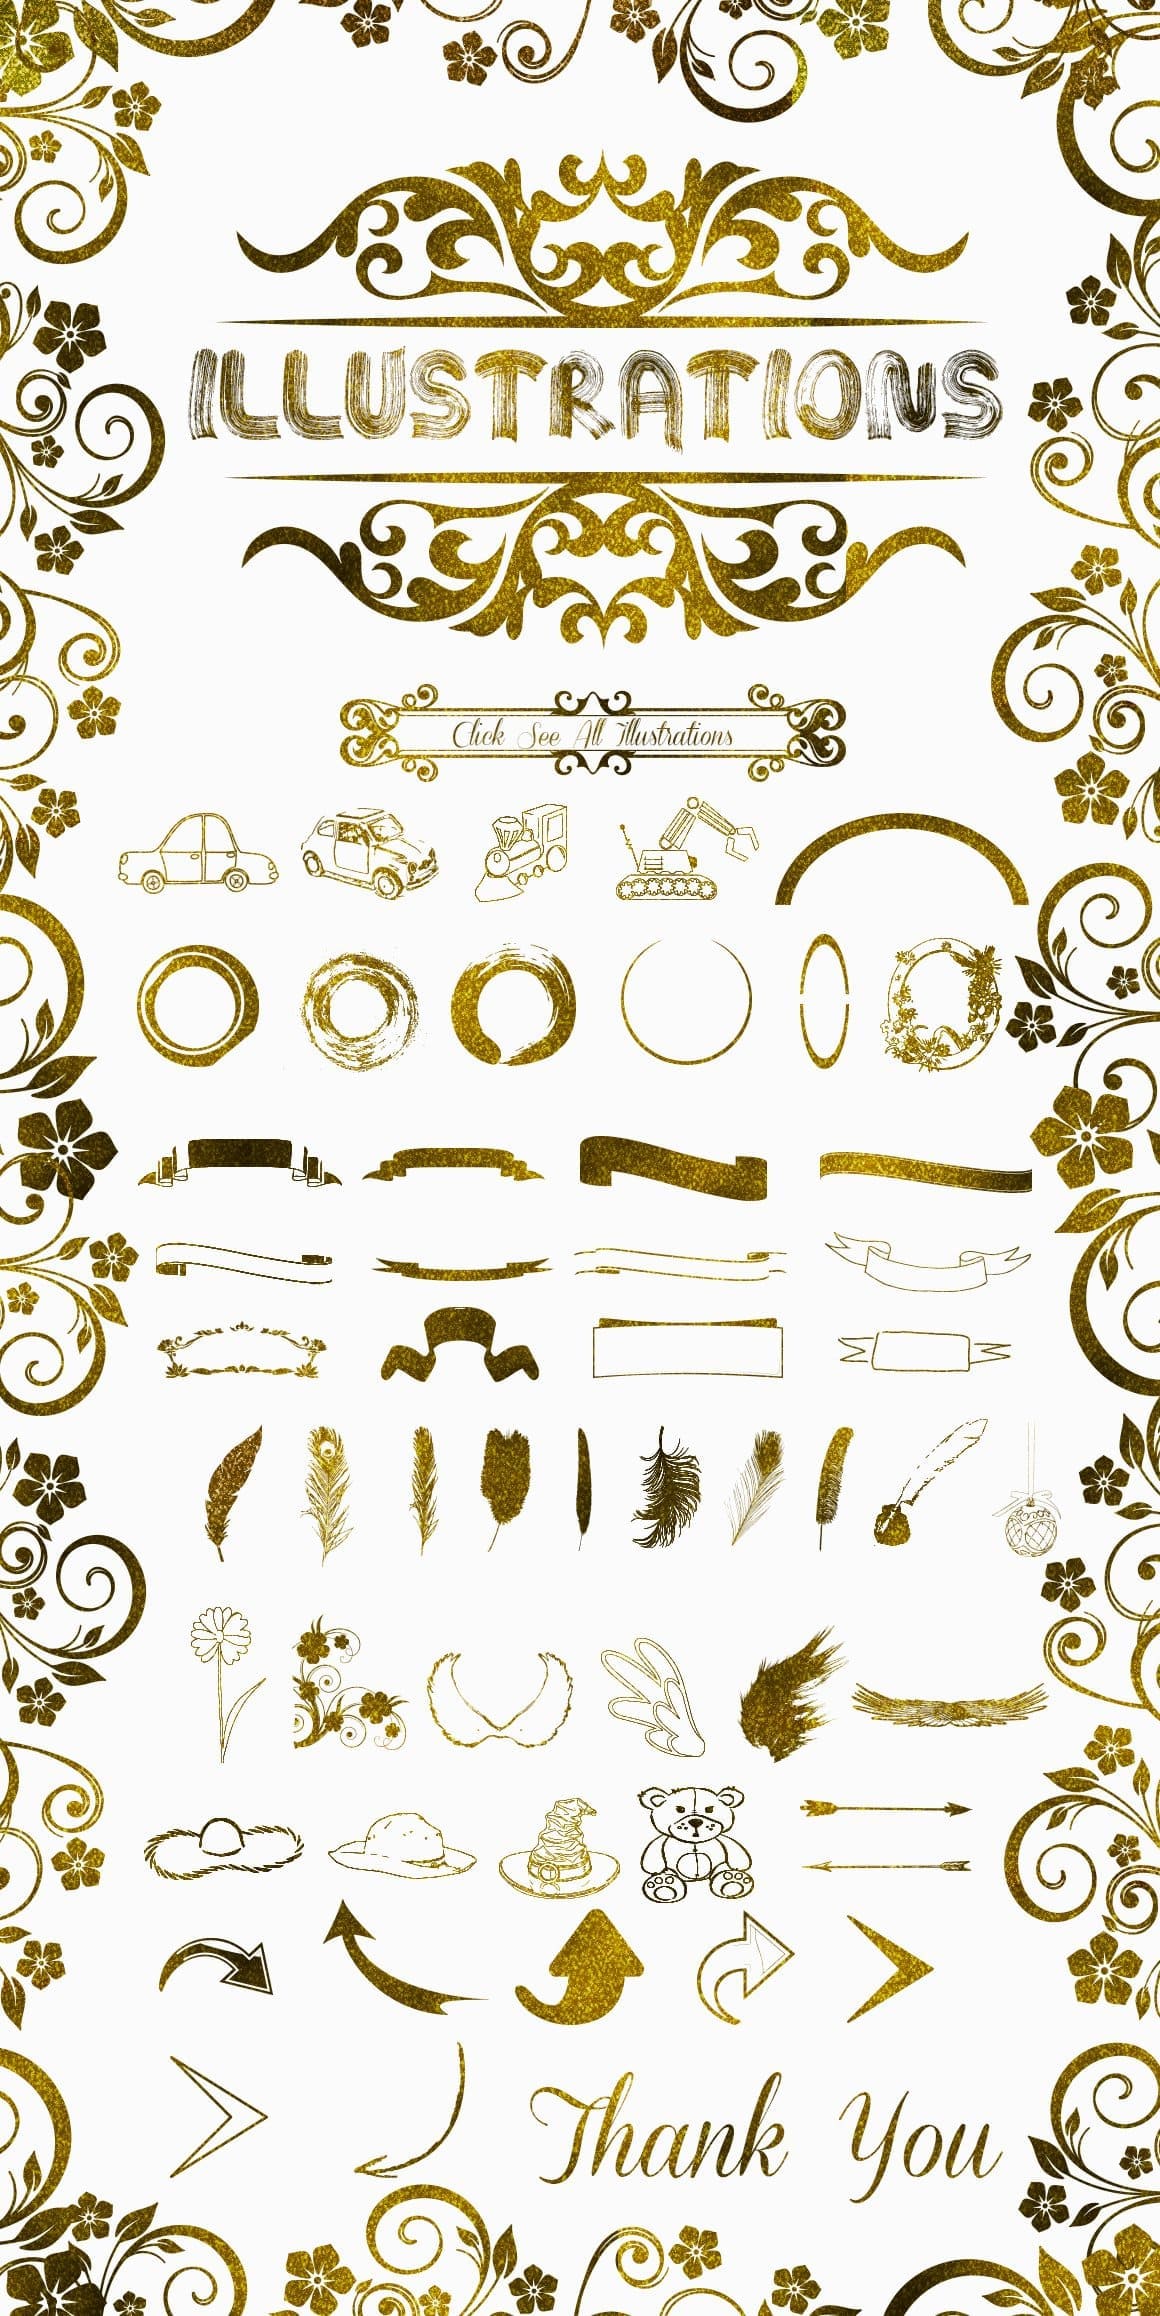 Jungle, many small gold illustrations on a large image.